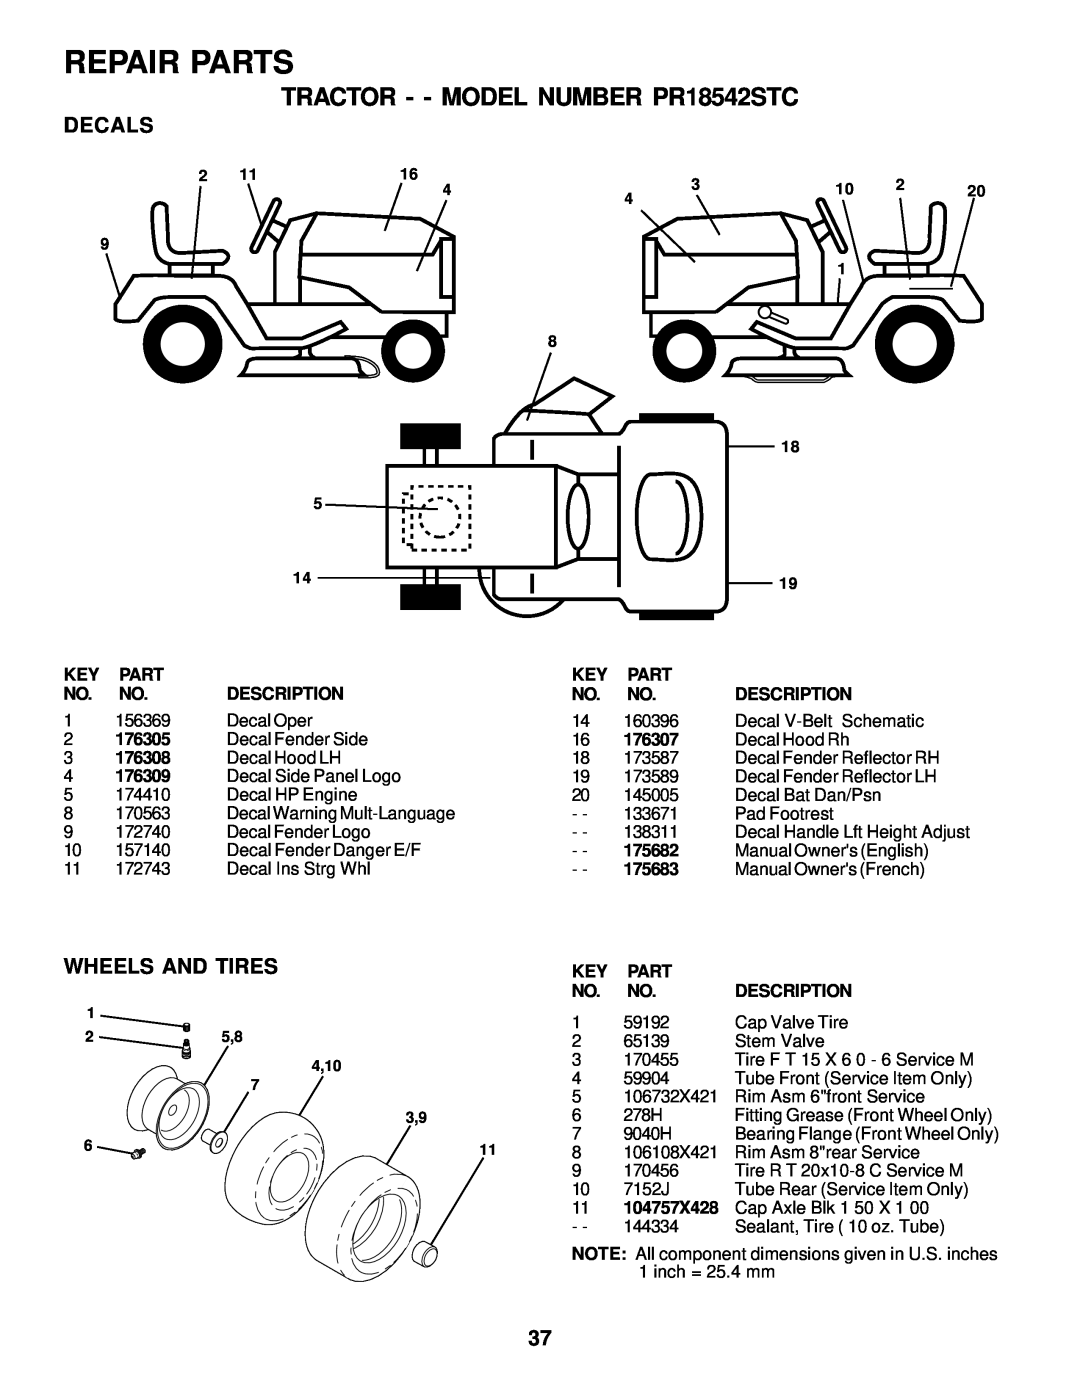 Poulan PR18542STC Decals, Wheels And Tires, 176305, 176307, 176308, 176309, 175682, 175683, 104757X428, Repair Parts 